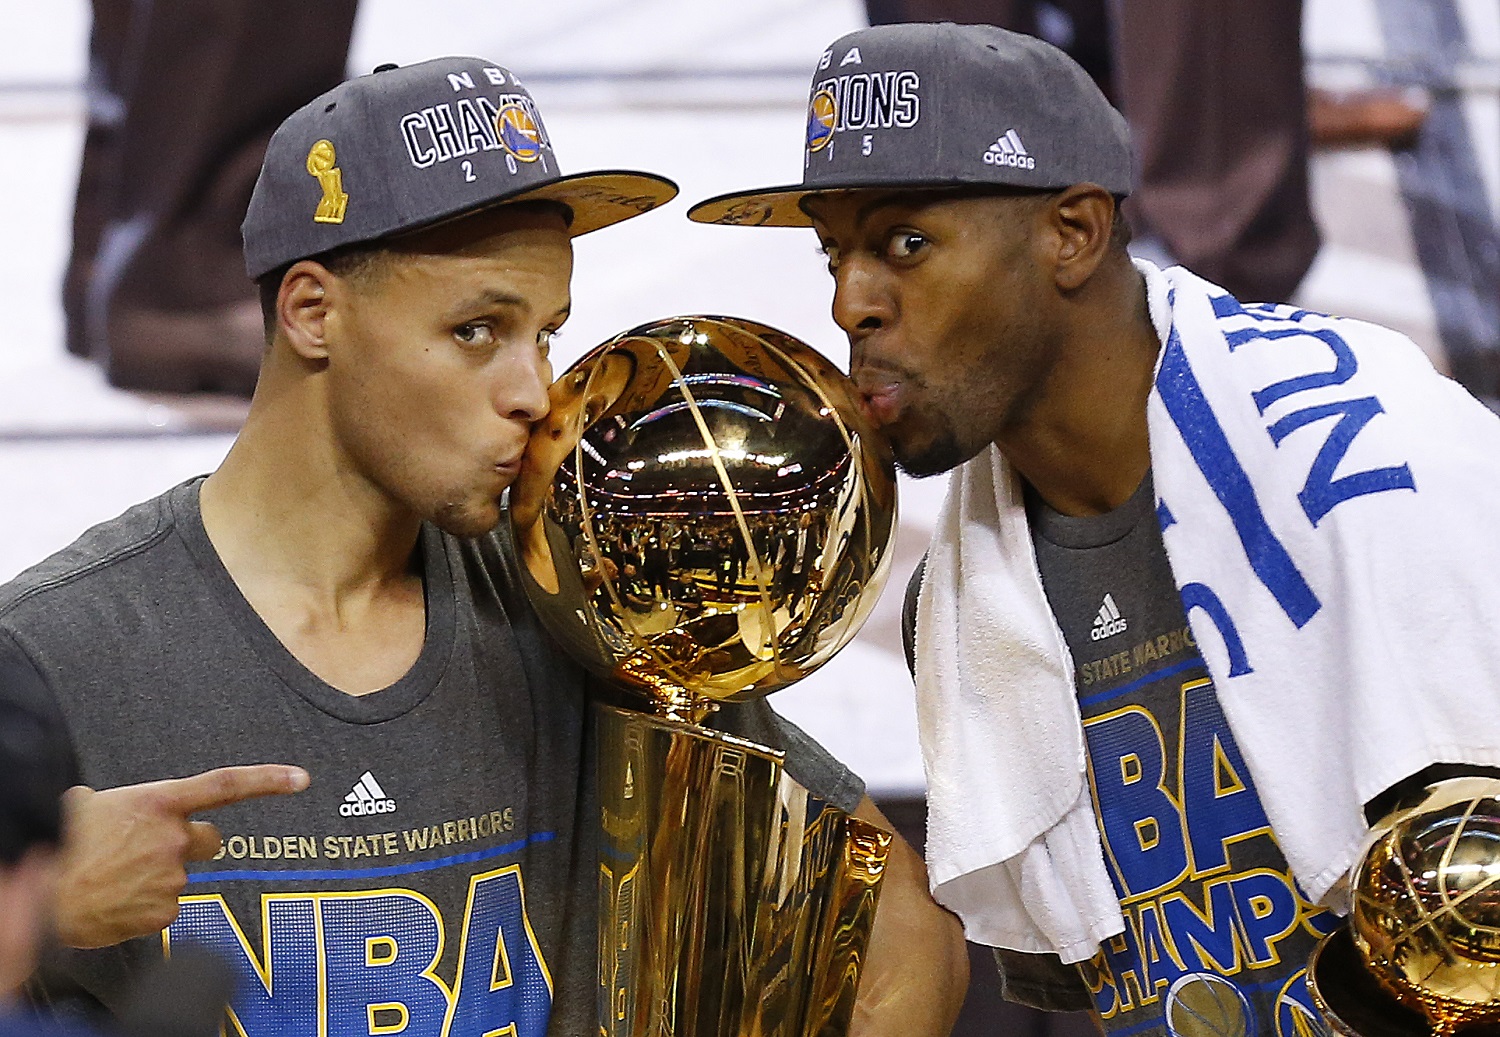 FILE - In this June 17, 2015, file photo, Golden State Warriors Stephen Curry, left, and Andre Iguodala kiss with the Larry O'Brien Trophy after defeating the Cleveland Cavaliers 105-7 in Game 6 of basketball's NBA Finals in Cleveland. NBA players James Harden and Anthony Davis checked right away to see their rating in a video game. Soon enough they can see how their teams rate in the NBA's Western Conference, where Stephen Curry's Golden State Warriors are the champs.  (AP Photo/Paul Sancya, File)